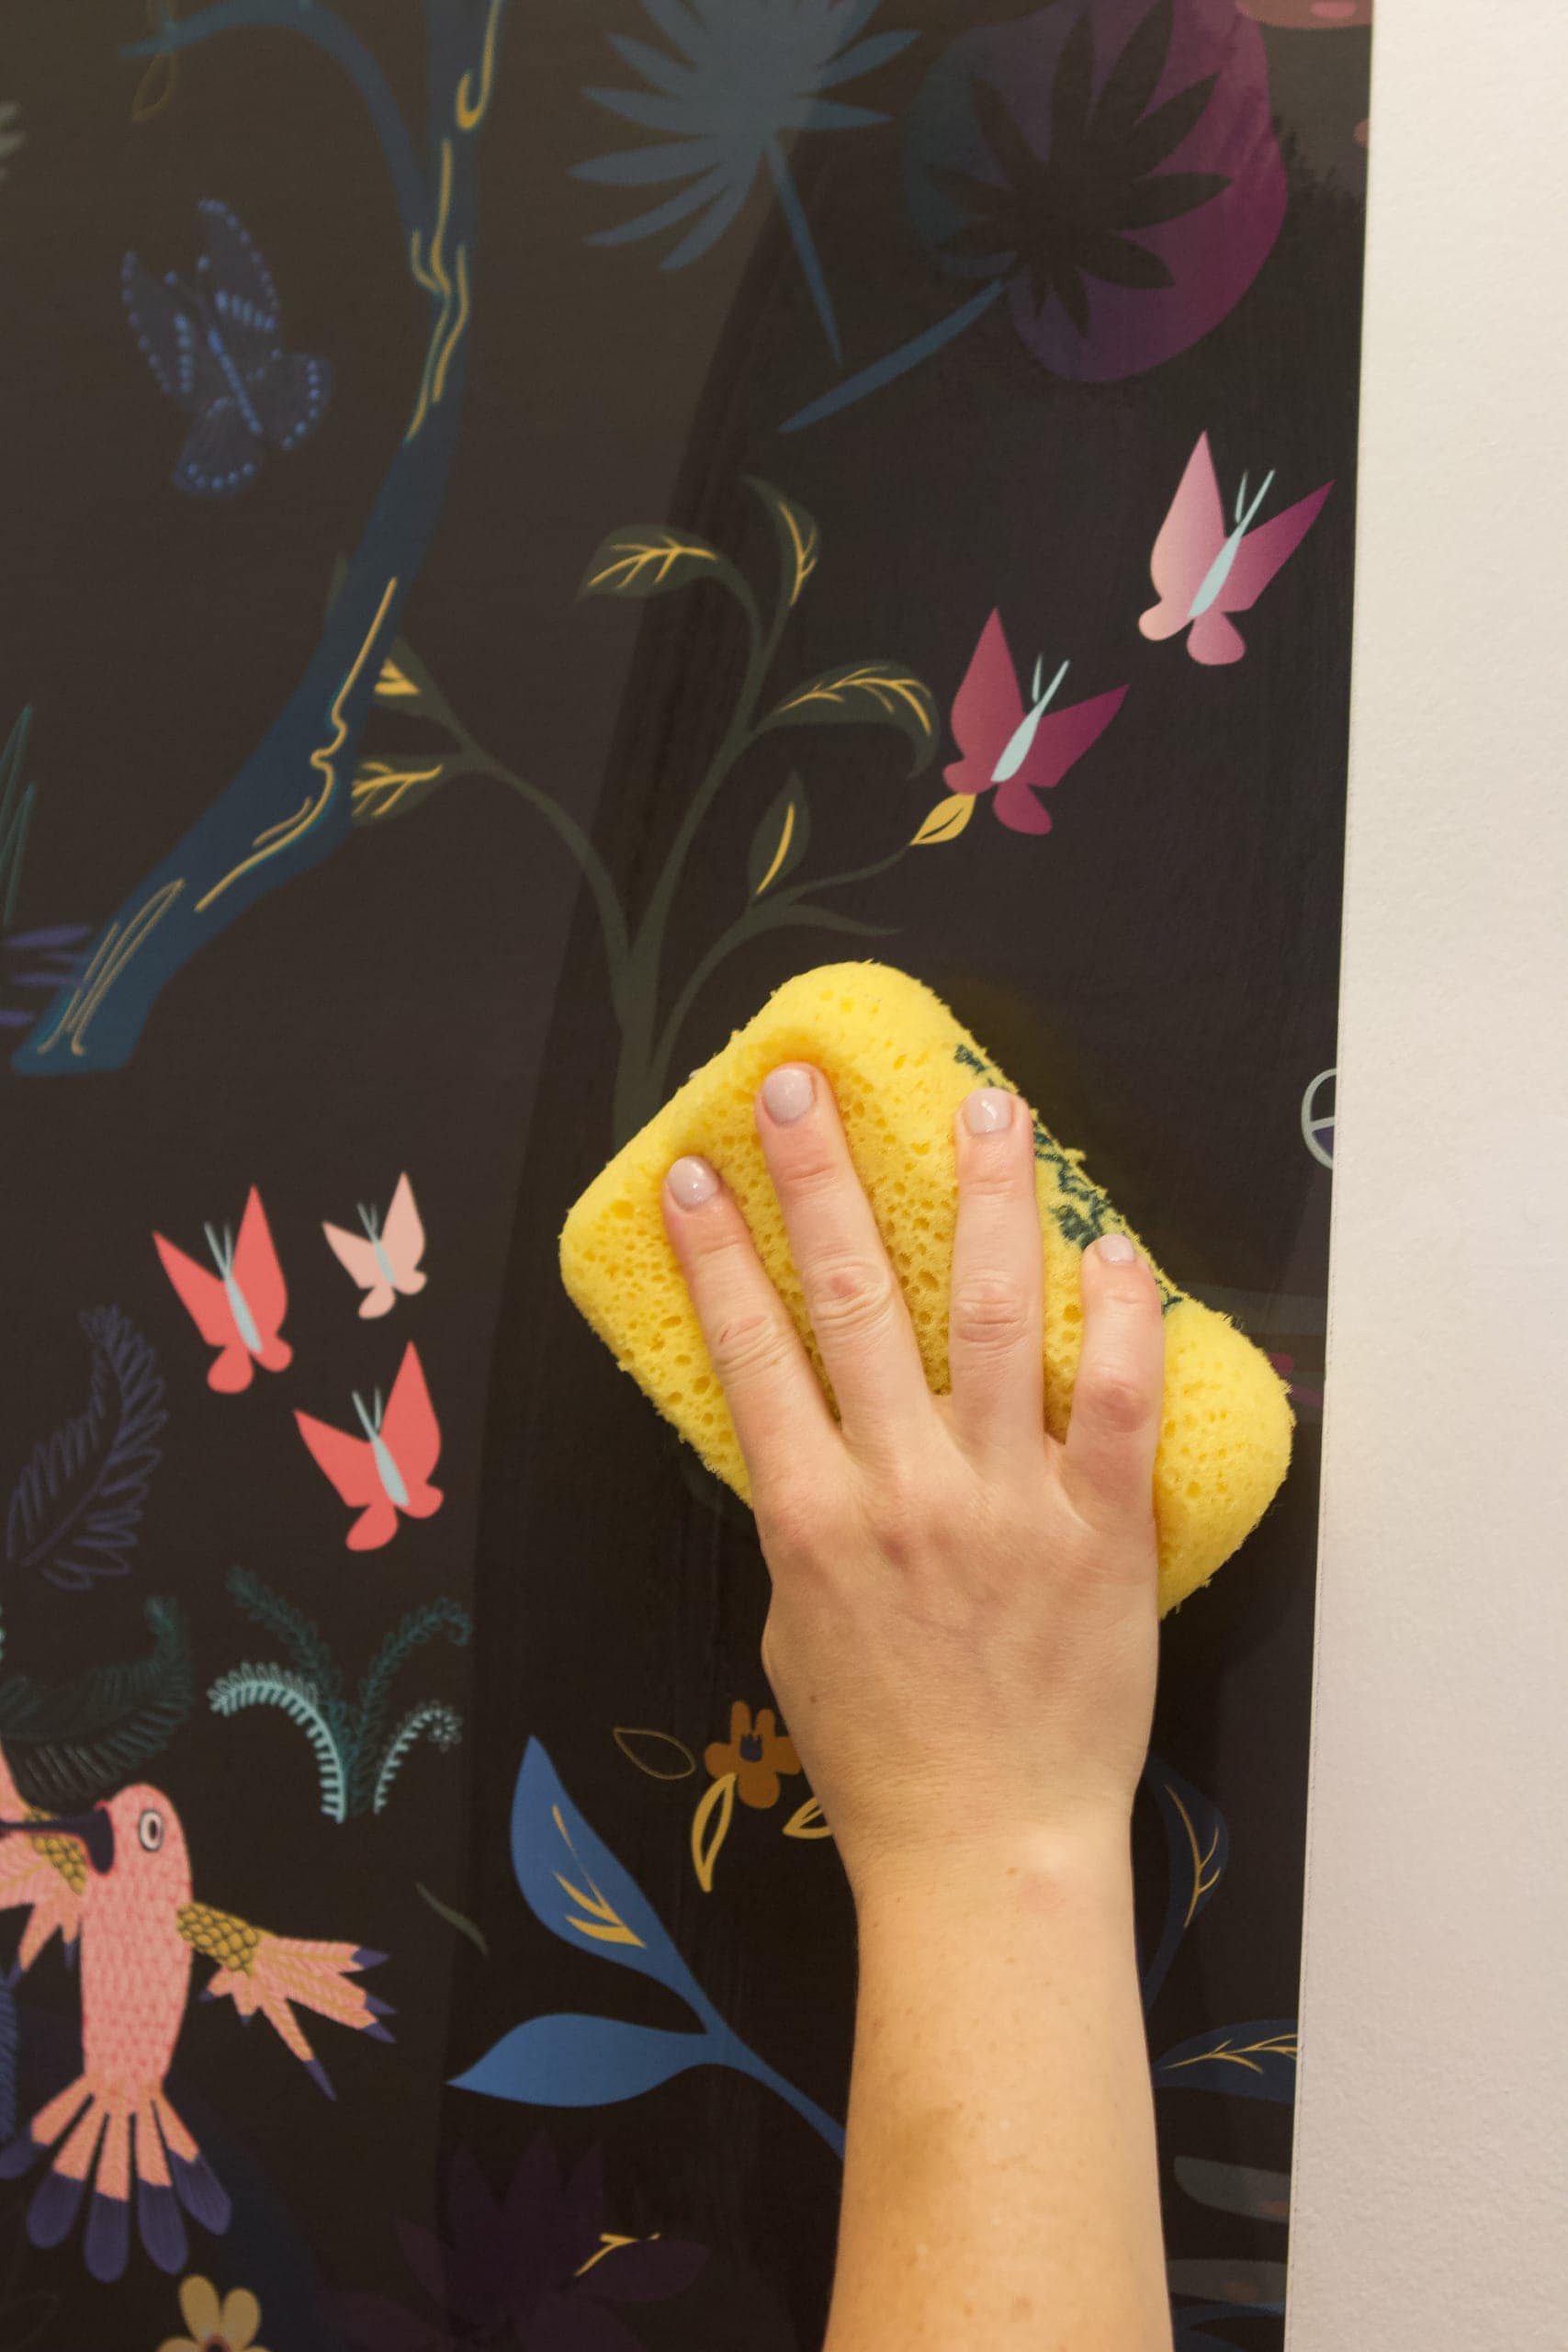 Wipe down the wallpaper with a sponge